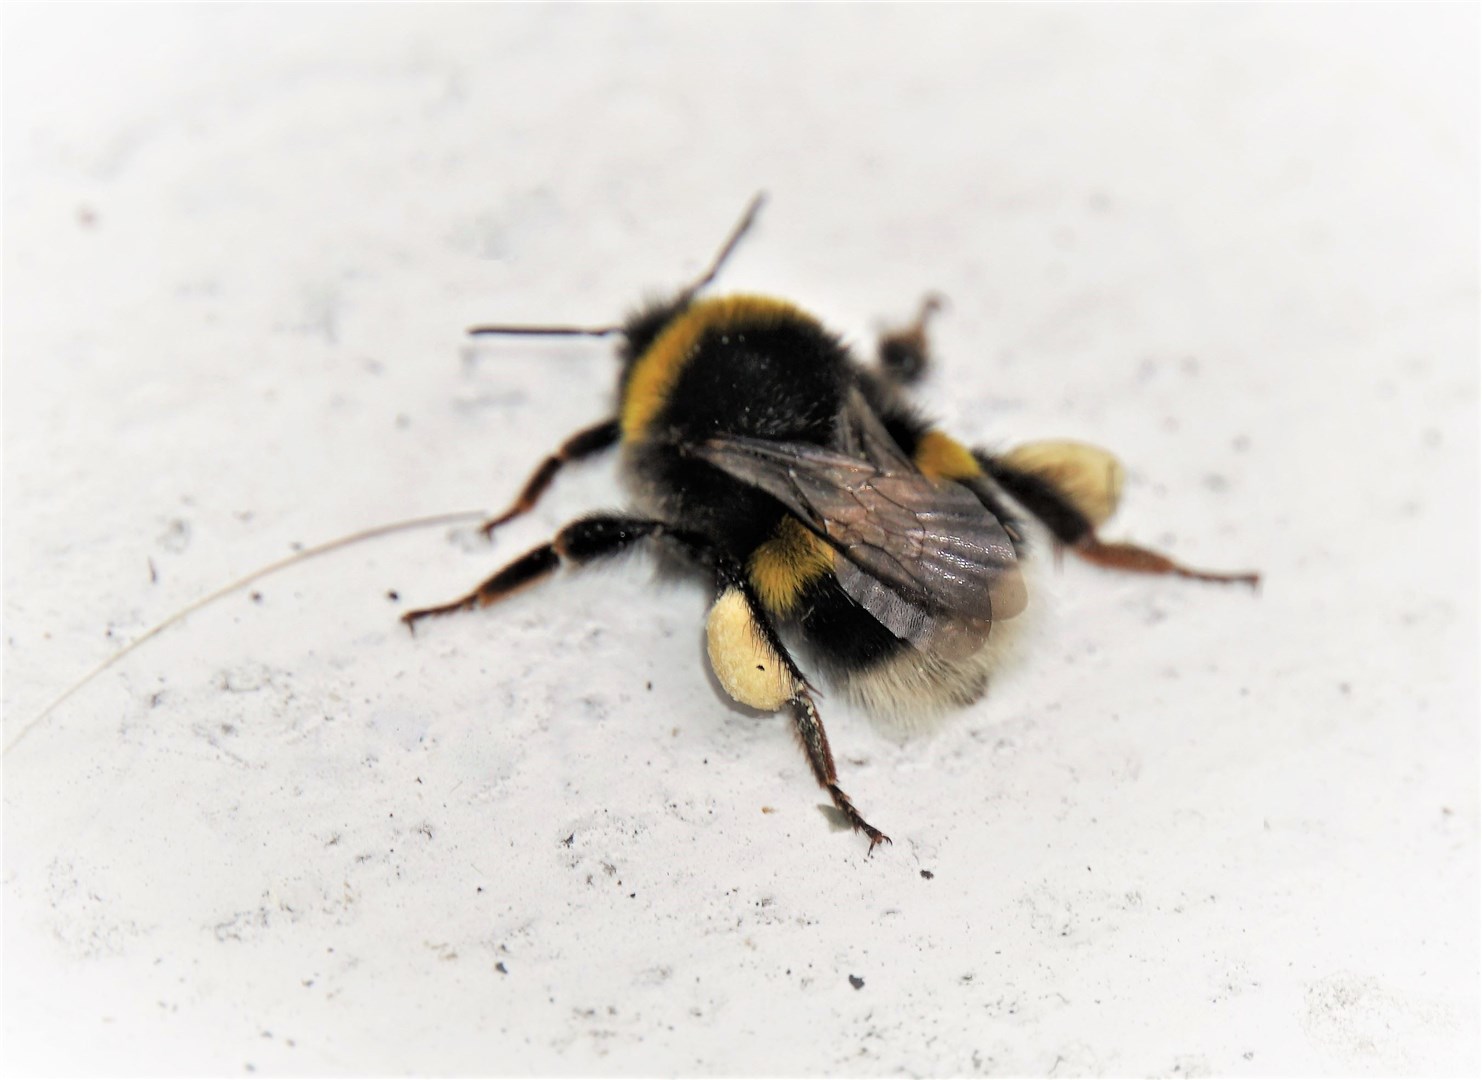 A busy bee laden with pollen takes a rest but can be helped with a simple sugar solution.